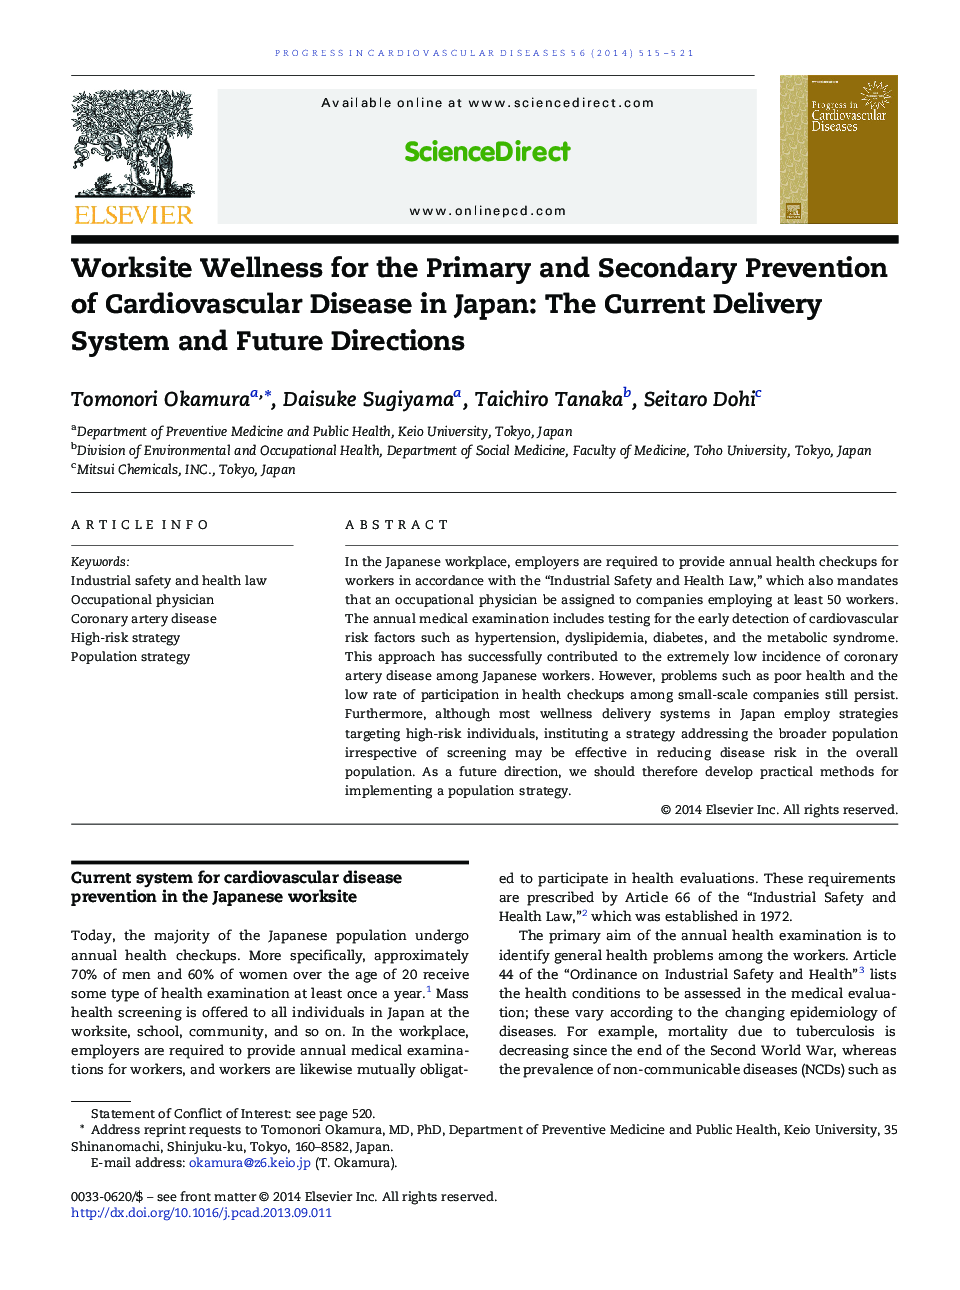 Worksite Wellness for the Primary and Secondary Prevention of Cardiovascular Disease in Japan: The Current Delivery System and Future Directions